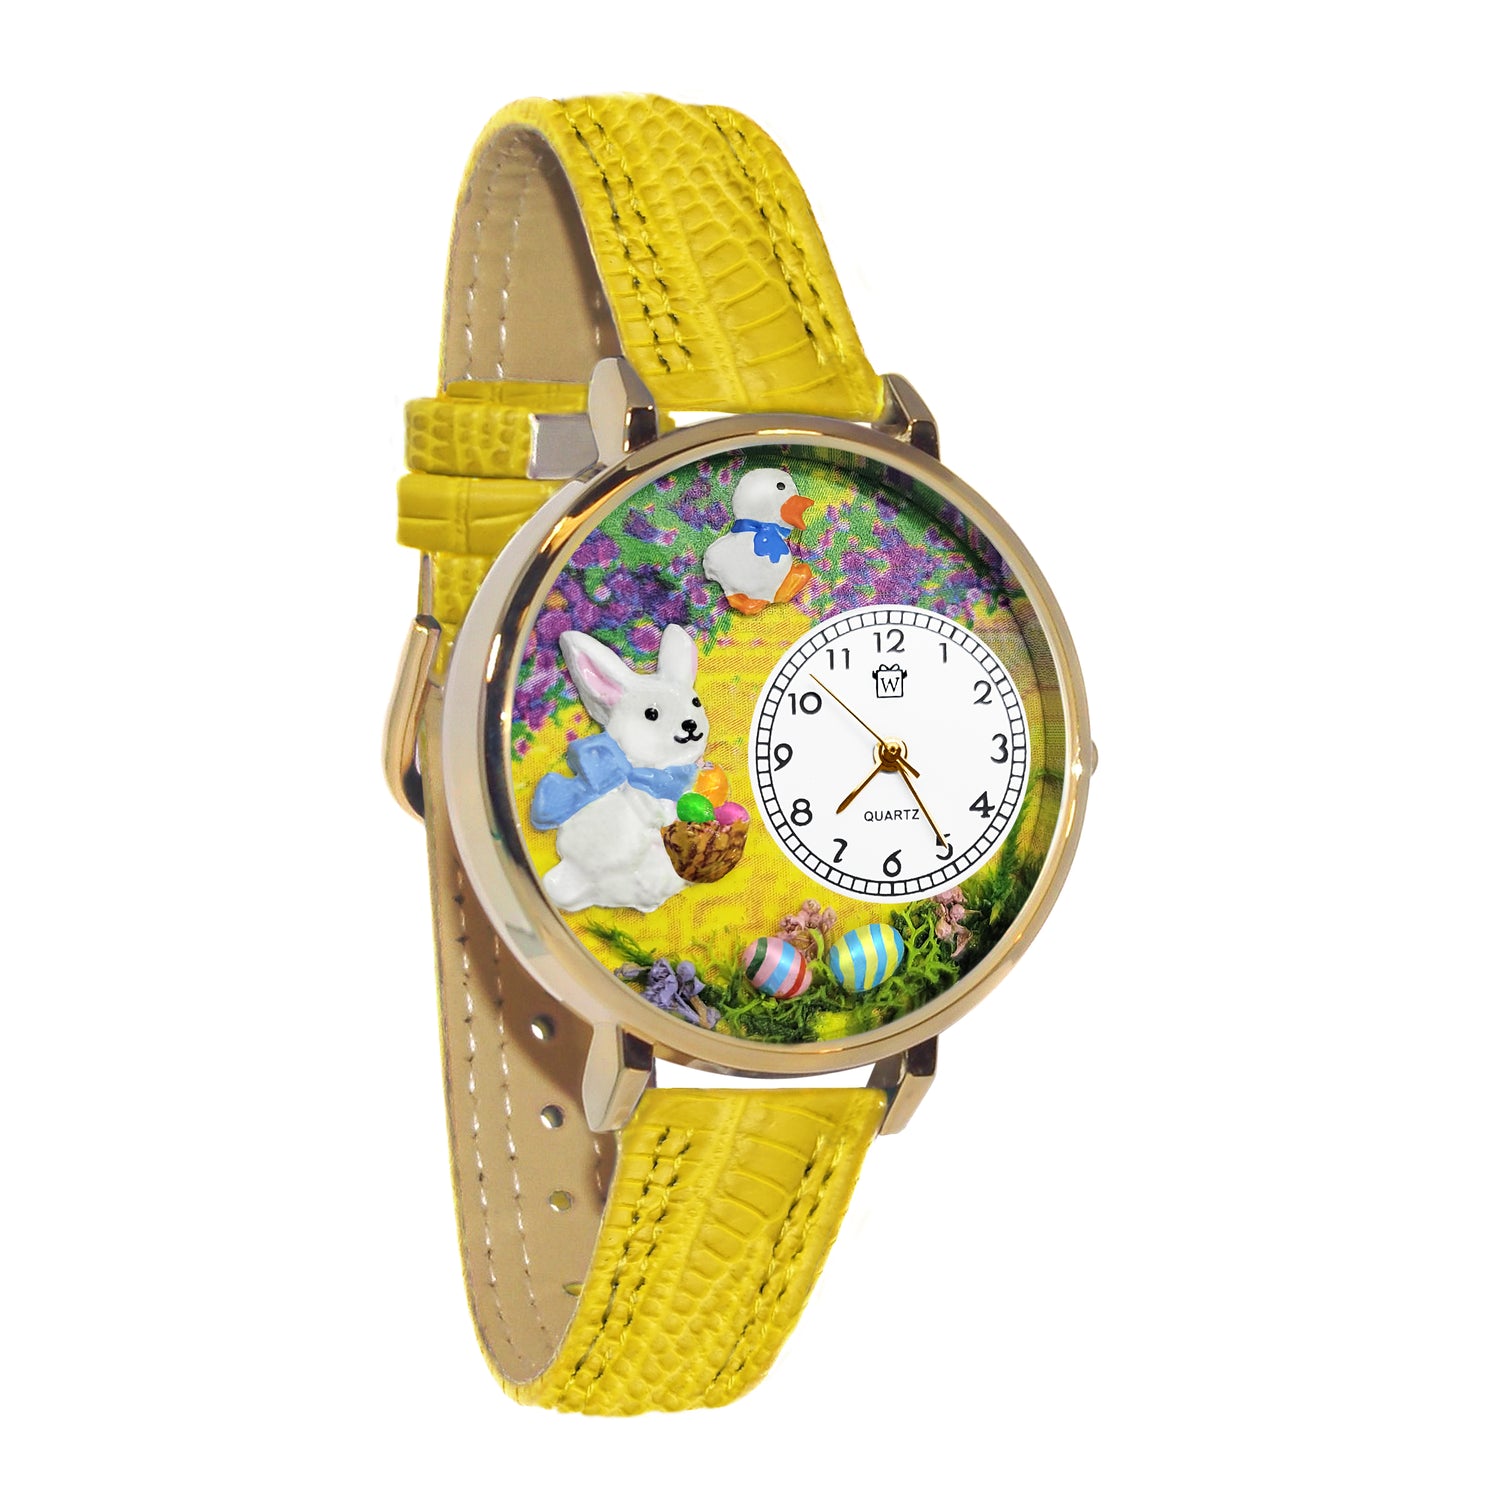 Whimsical Gifts | Easter Bunny 3D Watch Large Style | Handmade in USA | Holiday & Seasonal Themed | Easter | Novelty Unique Fun Miniatures Gift | Gold Finish Yellow Leather Watch Band